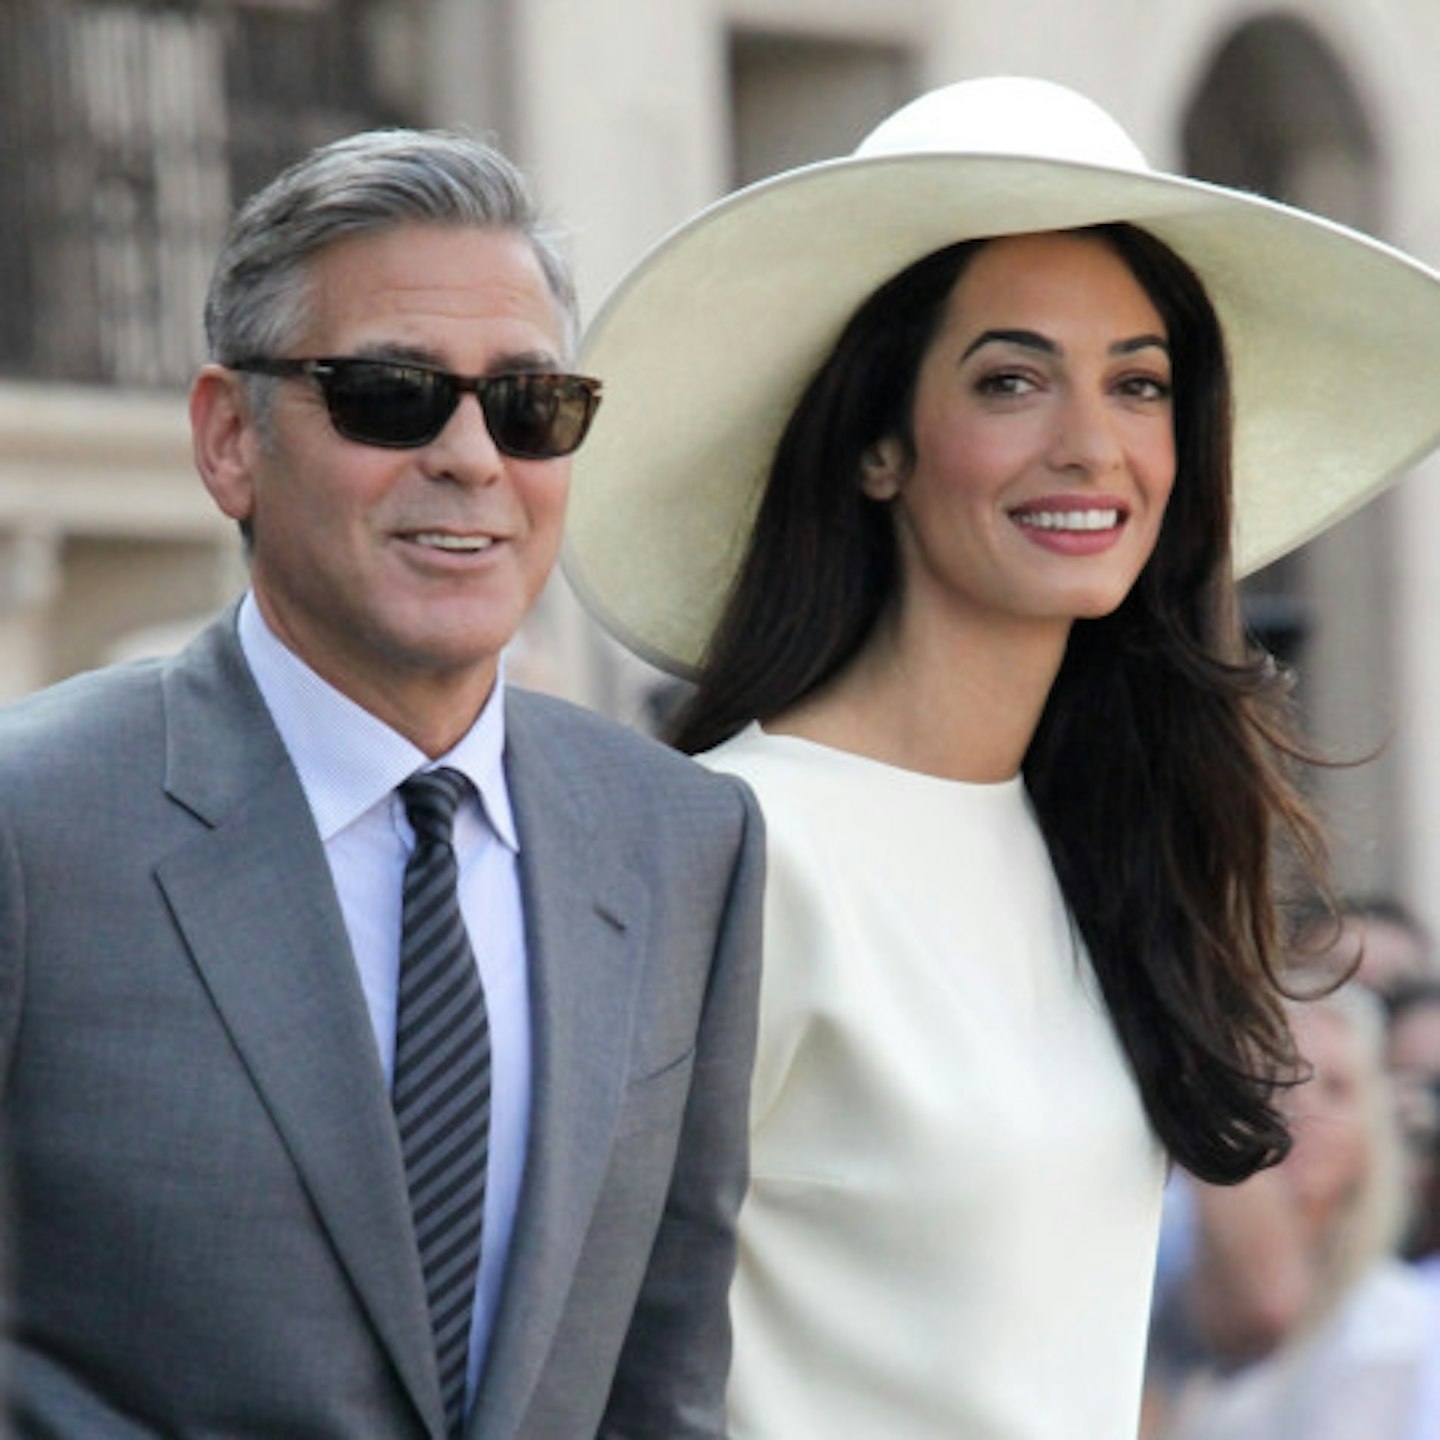 George wed British lawyer Amal in Venice this summer